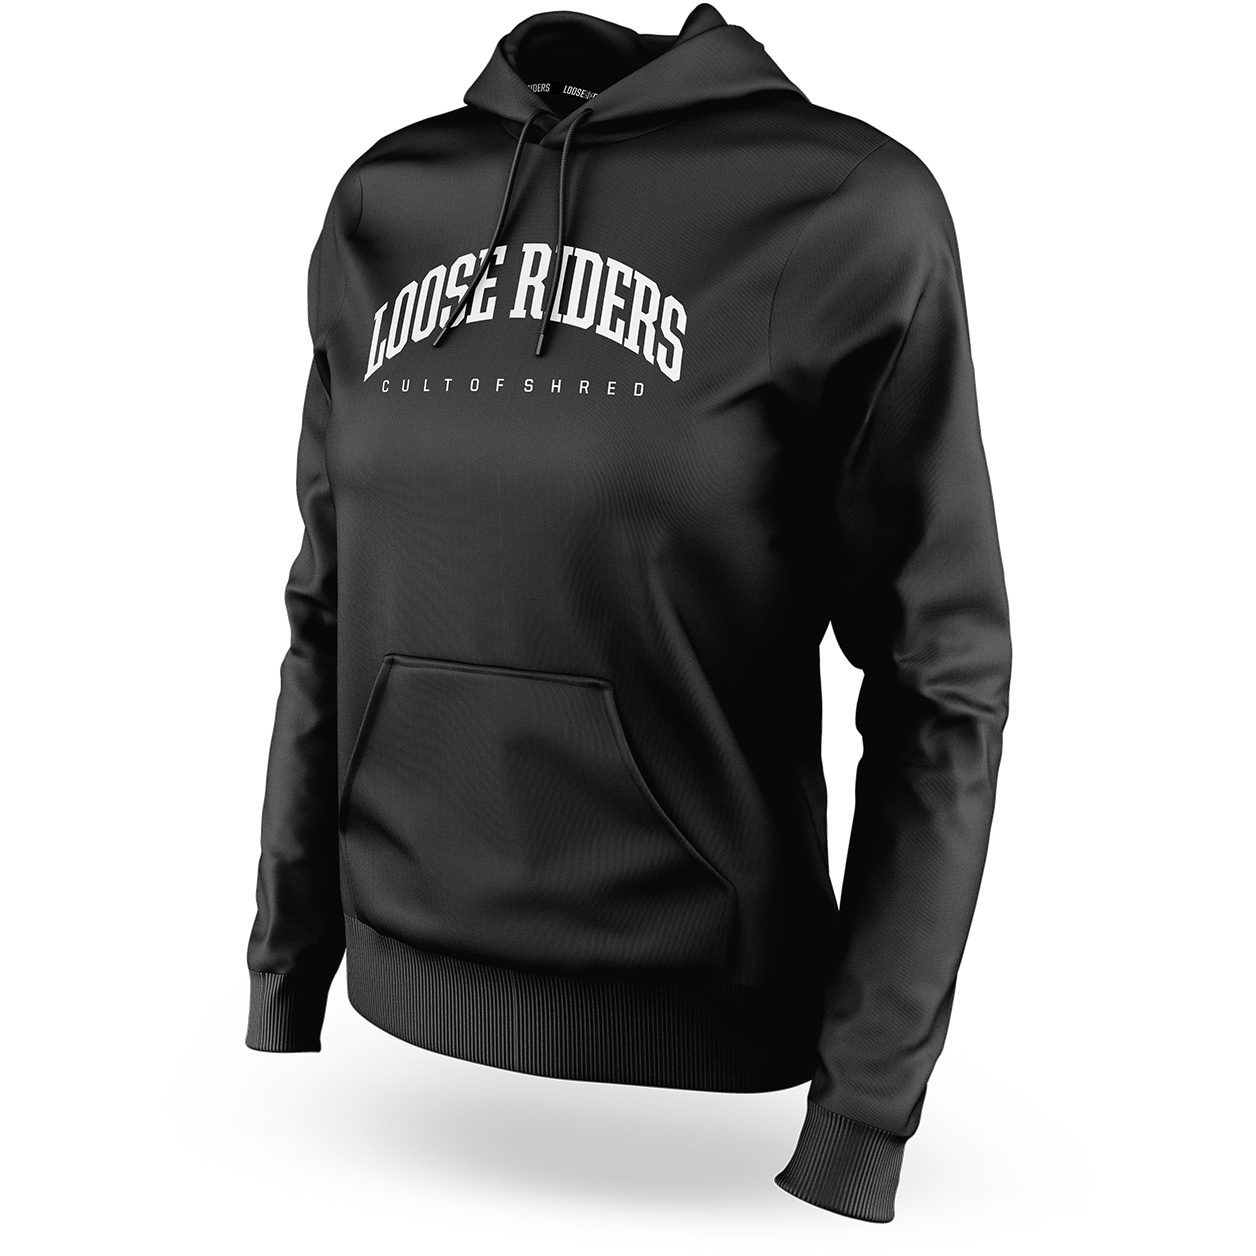 Image of Loose Riders Classic Lifestyle Womens Hoody Pullover - Black